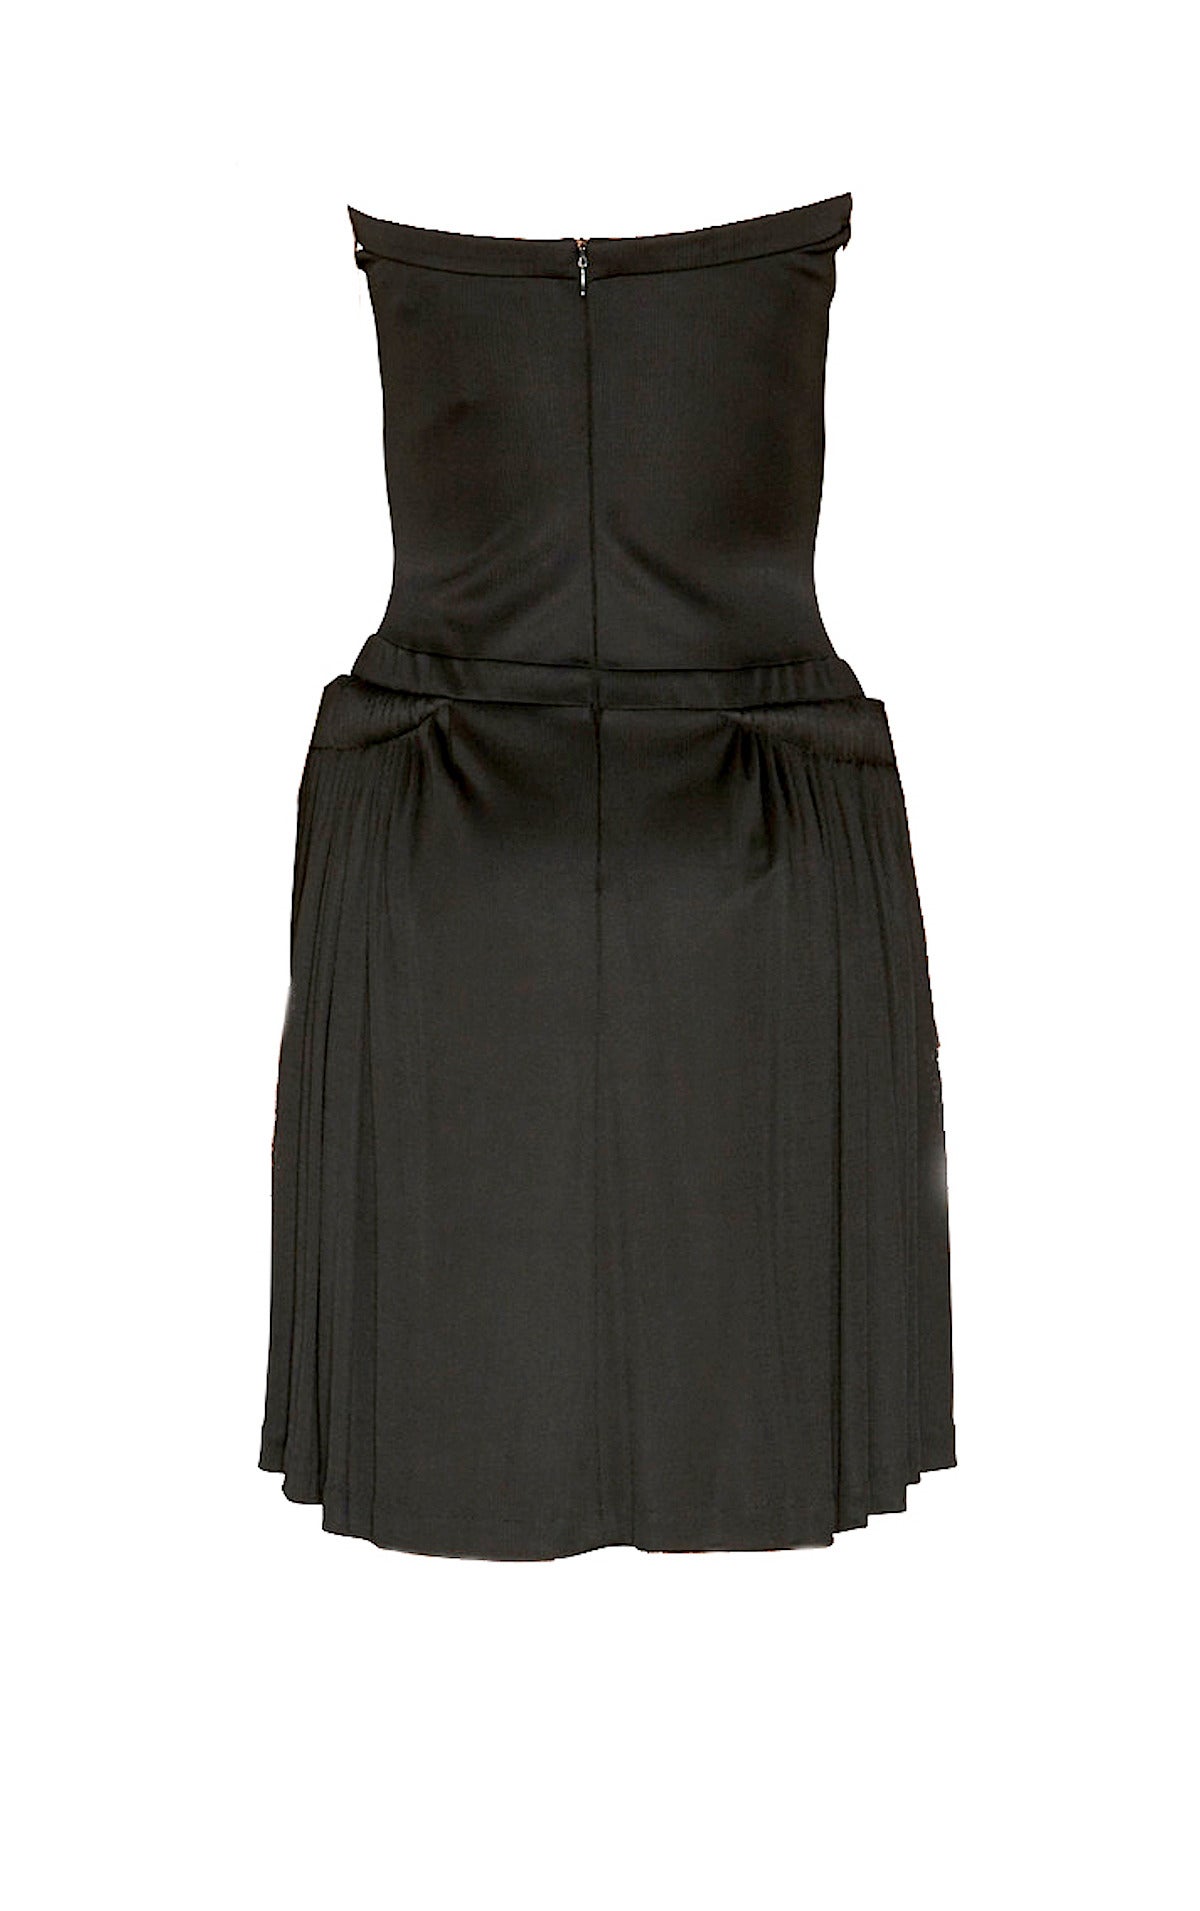 Stunning Balenciaga 2008 black viscose strapless knee-length dress with bustier and intricate folds along each hip, creating gorgeous draping at the bottom of the dress.
Back zippered closure.